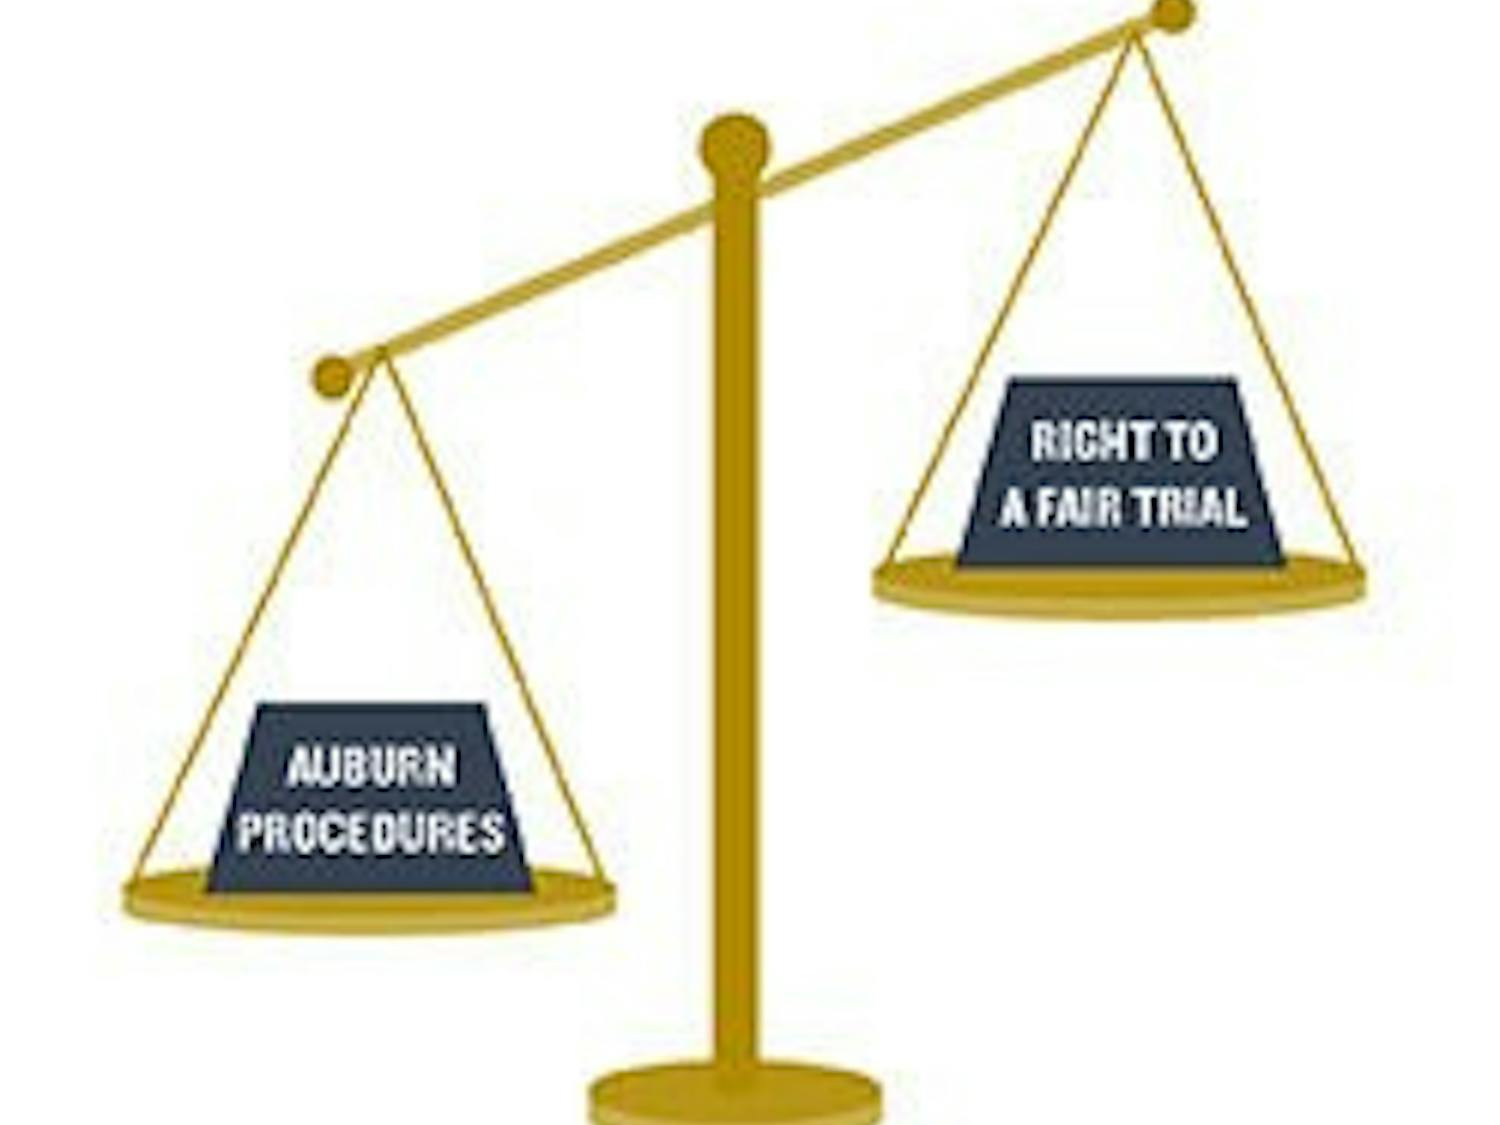 The right to an unfair and speedy trial editorial graphic